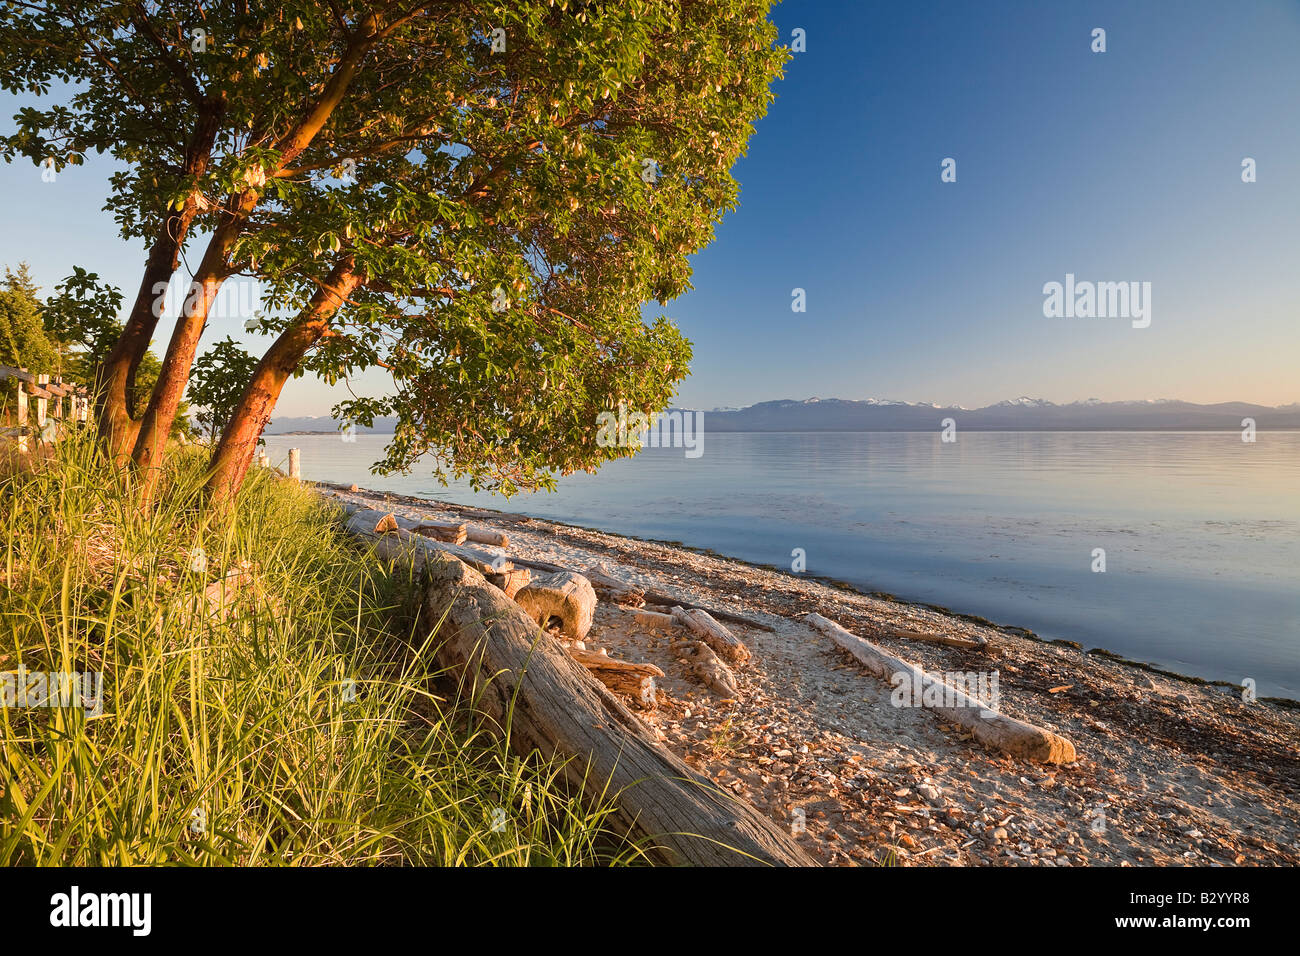 Tree and Driftwood on Beach, Smelt Bay Provincial Park, British Columbia, Canada Stock Photo